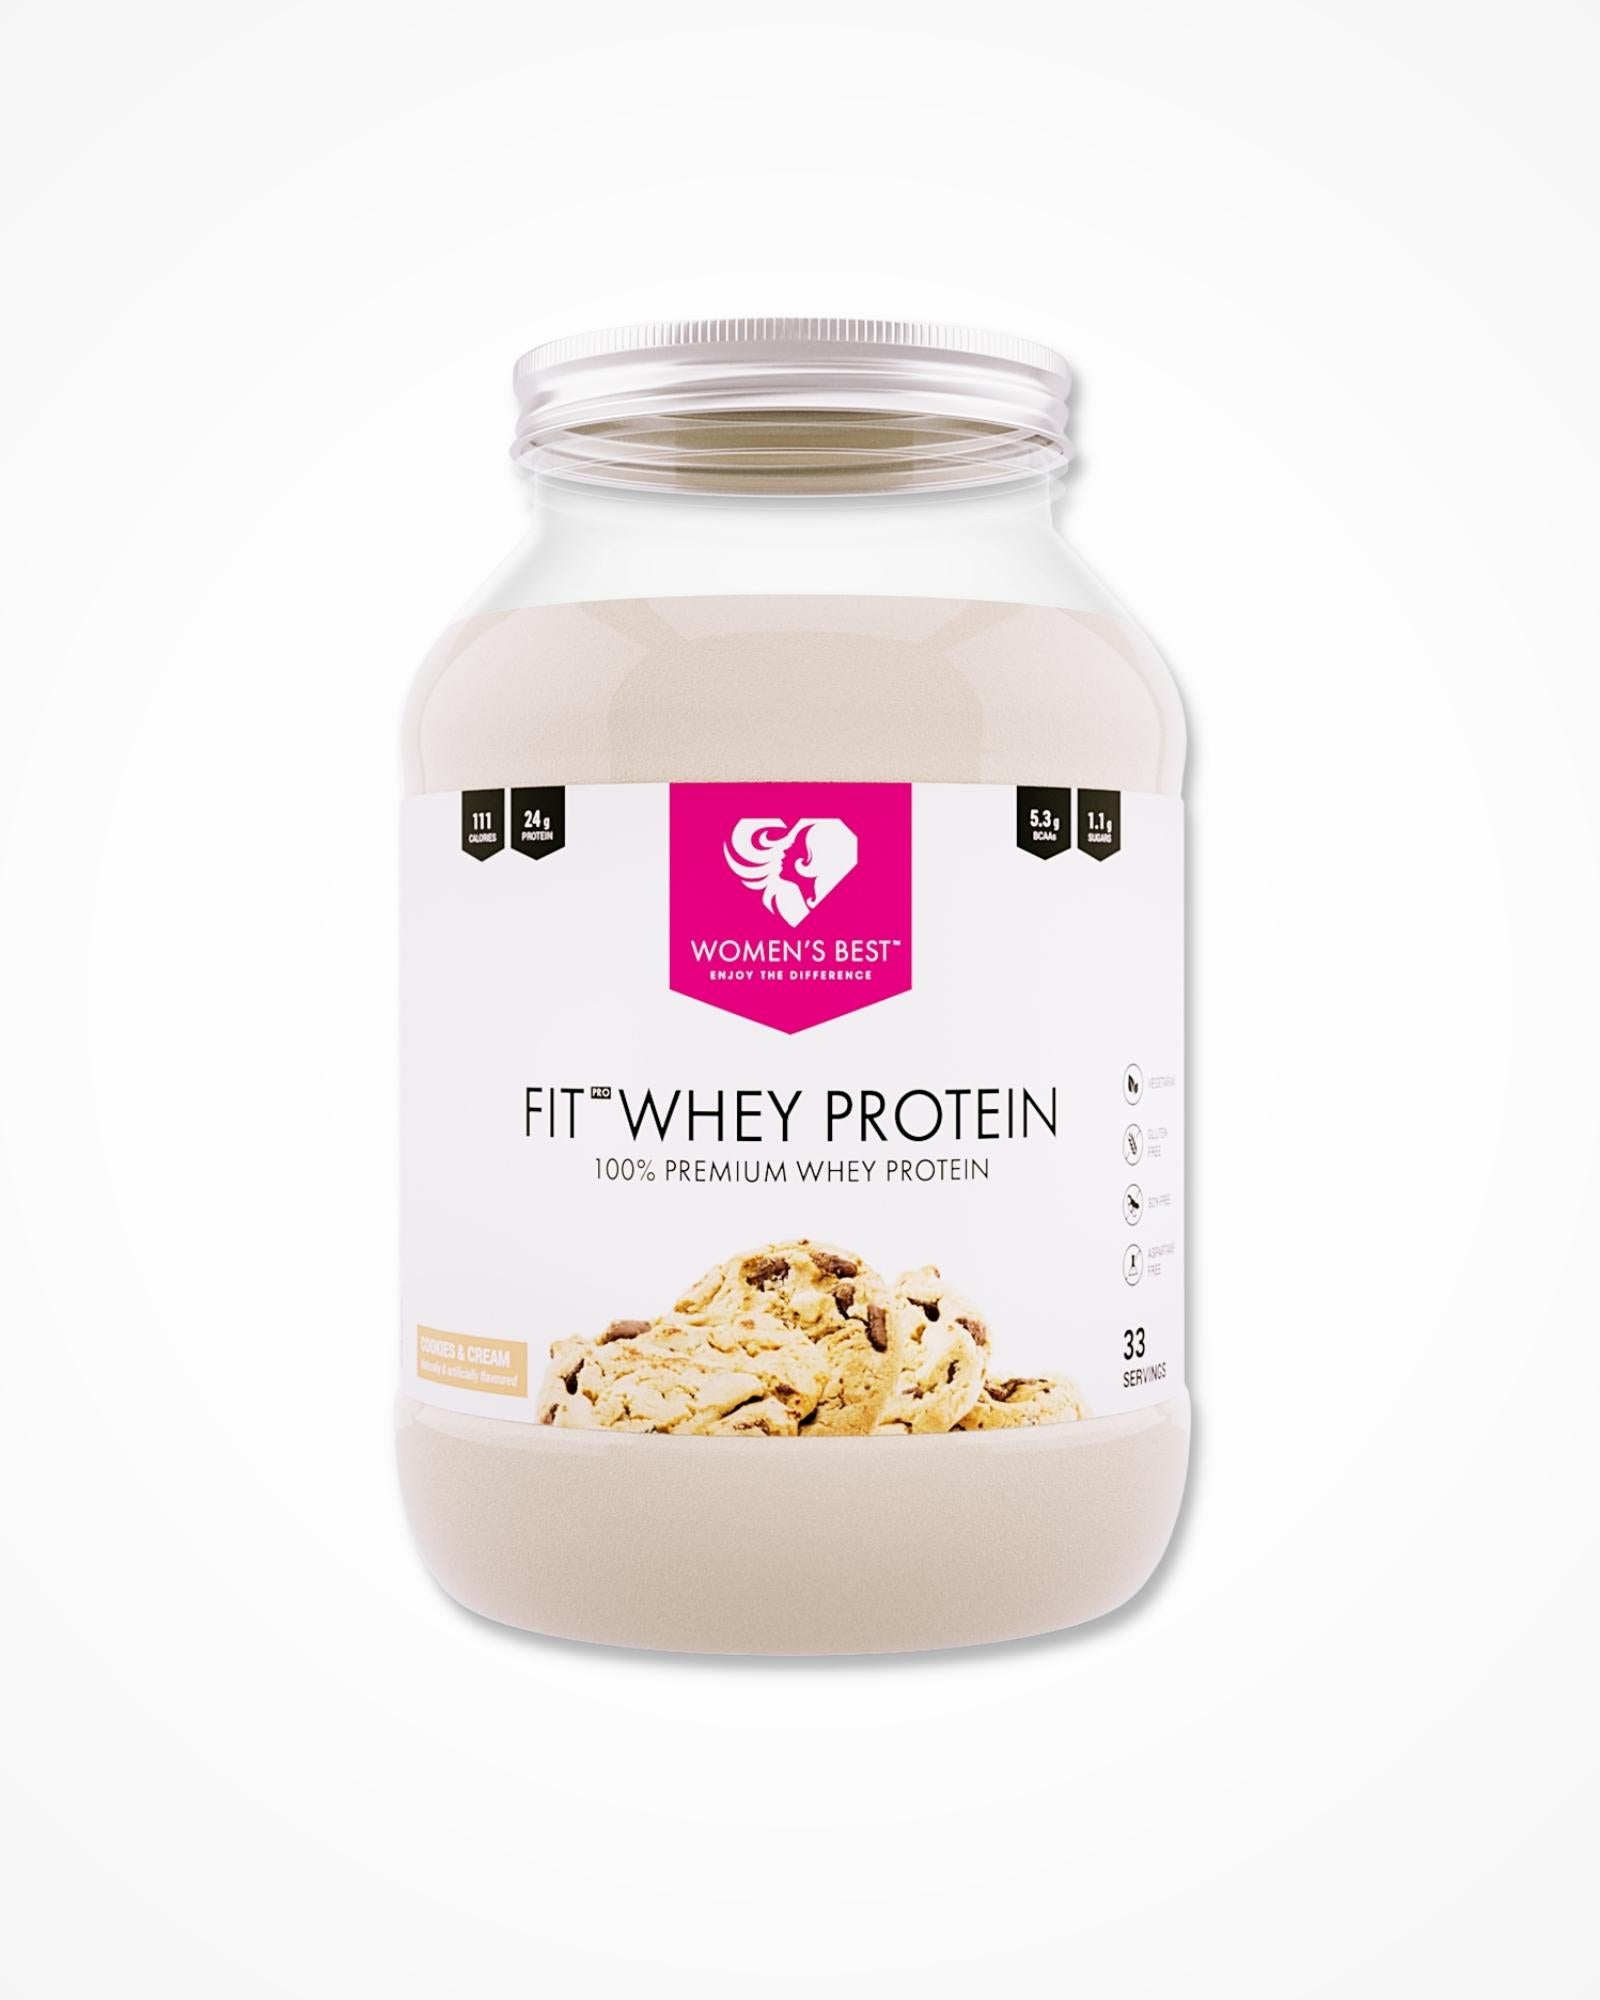 fit-whey-protein-cookies-cream-womens-best-by-win-win